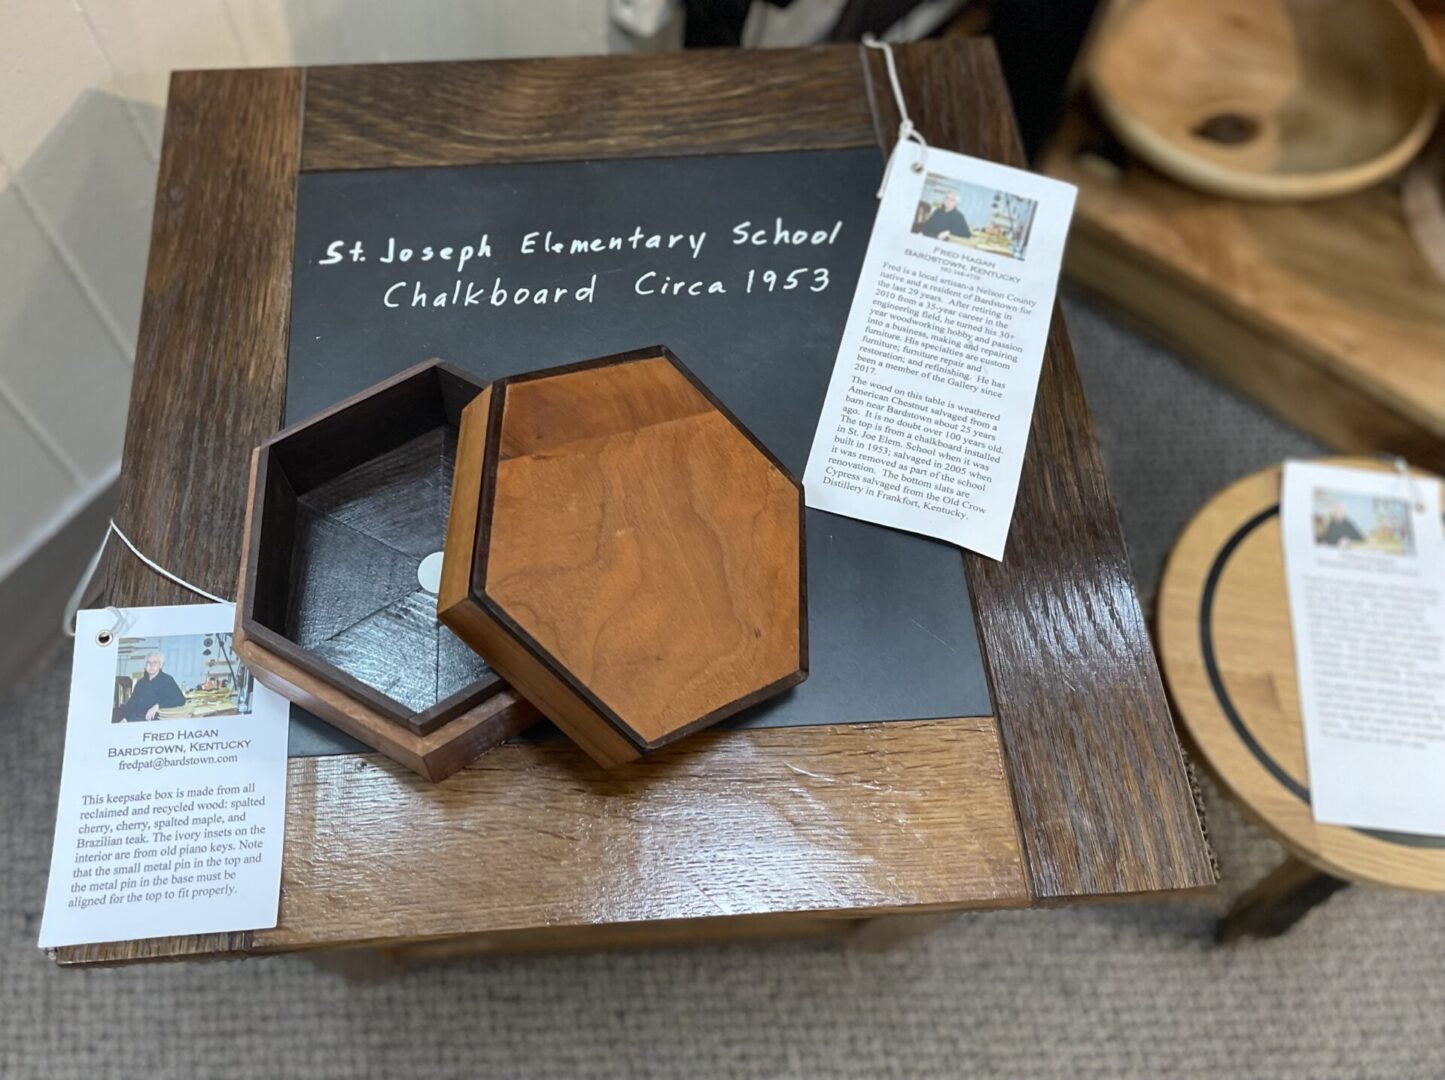 A wooden box with a sign on it.